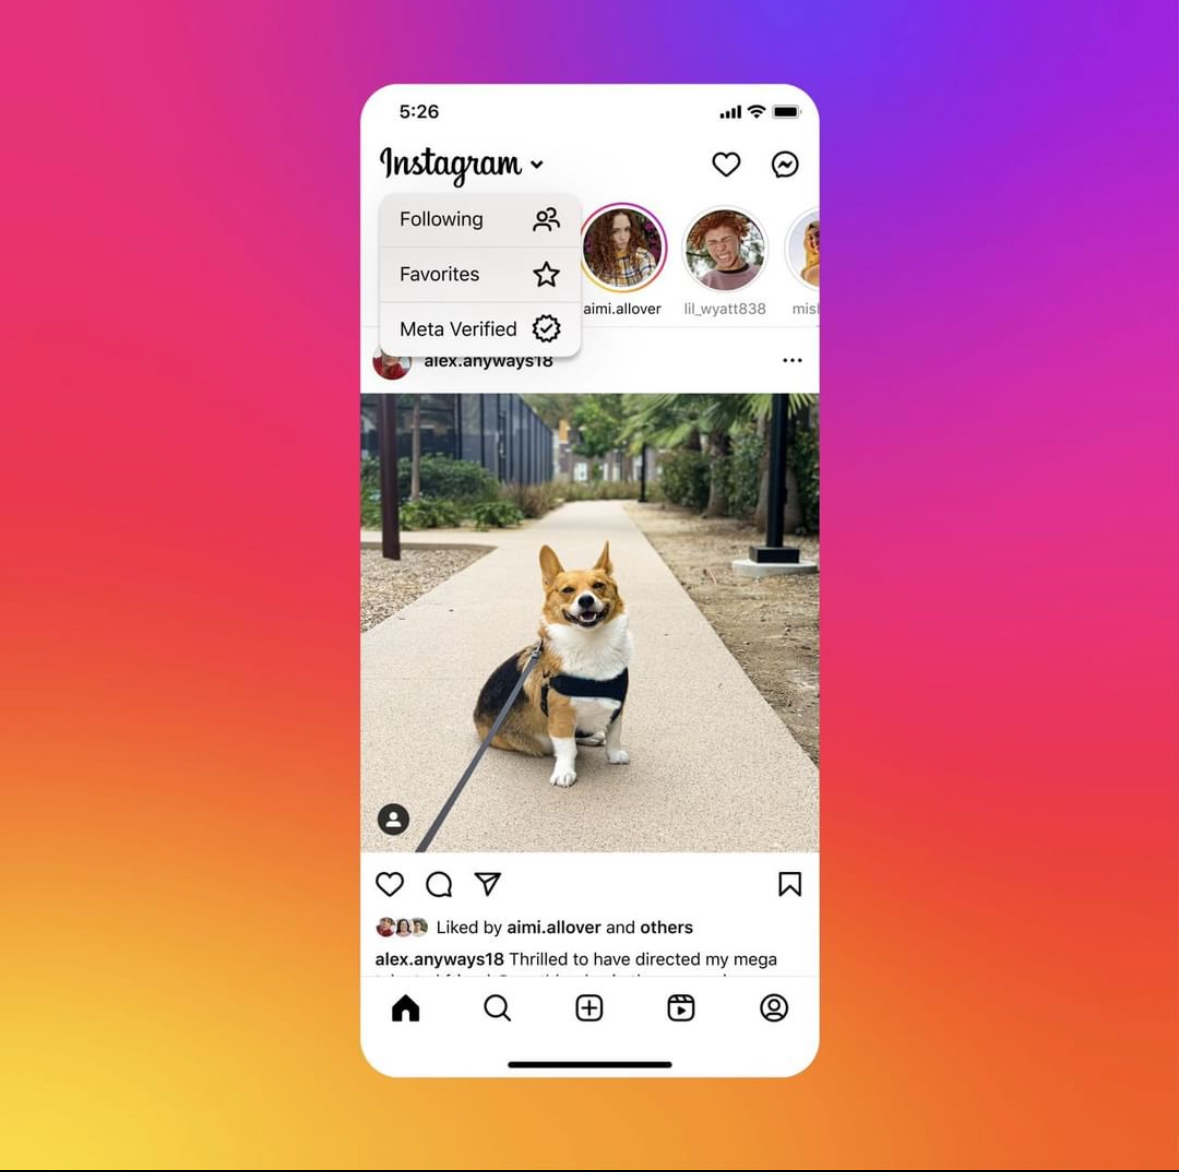 Instagram: Verified-Only Feed is Now Under Testing says CEO Adam Mosseri